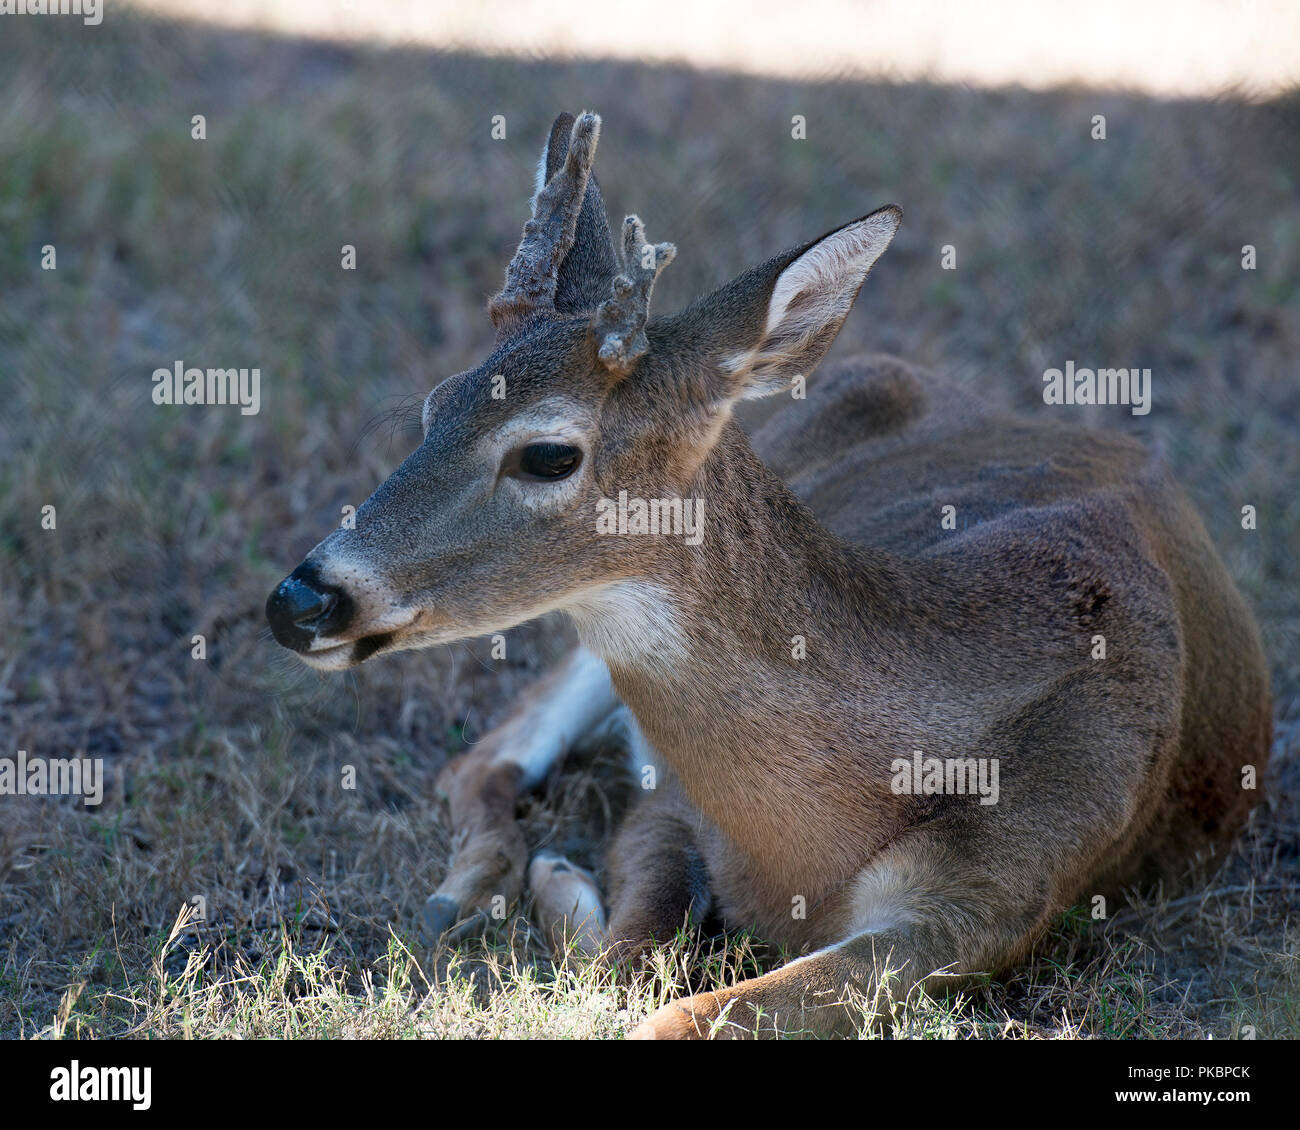 Deer animal resting close-up view displaying body, head, anthlers, ears, eyes, nose, legs in its environment and surrounding with a bokeh background. Stock Photo